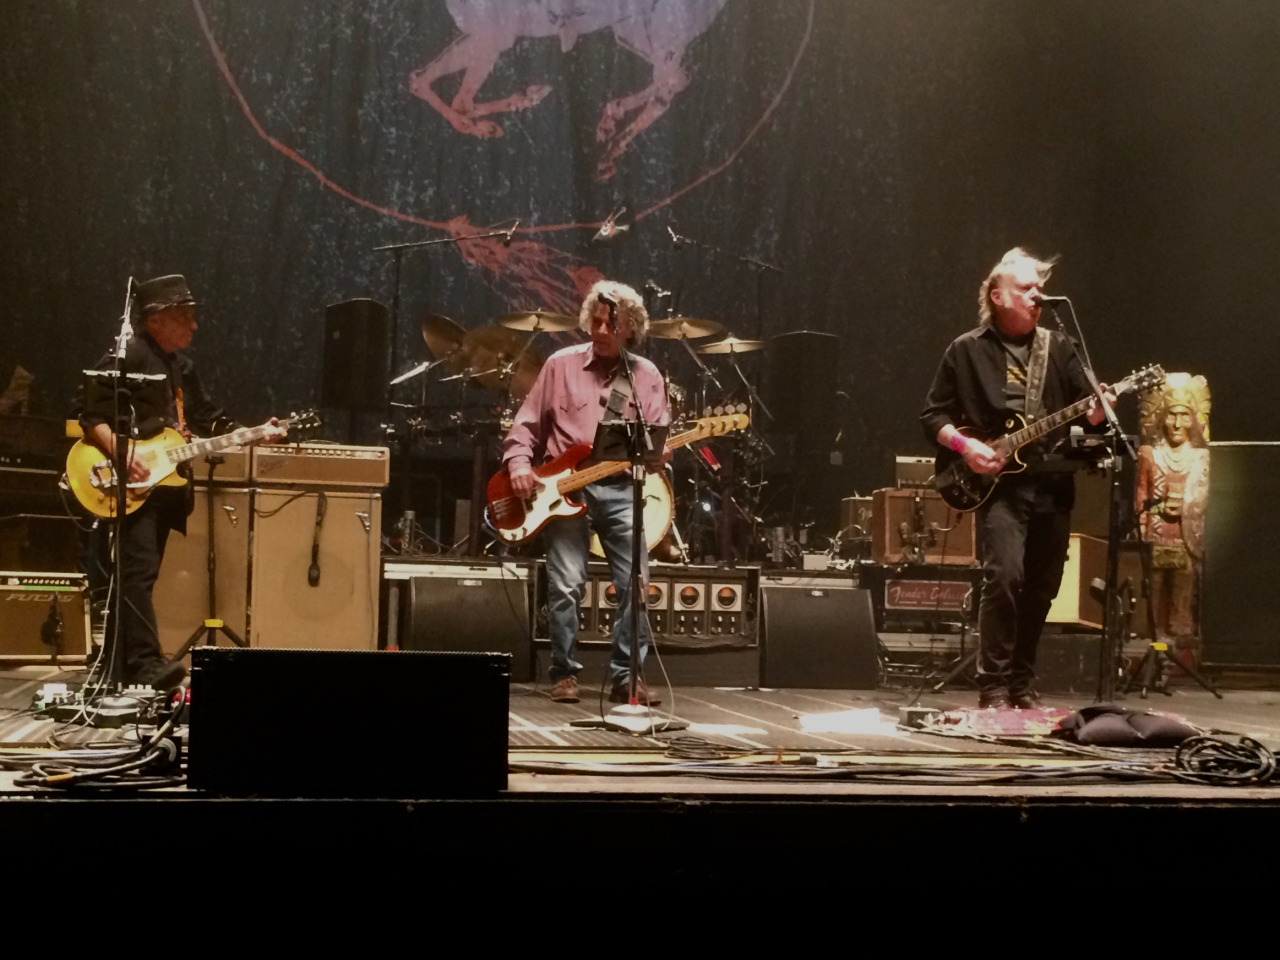 Neil Young & Crazy Horse - Warnors Theater, Fresno, California, May 1, 2018
Welcome to Fresno! Neil brought Crazy Horse back in 2018 for an all-too-brief run of shows way off-Broadway at a few central California theaters. There was a big change,...